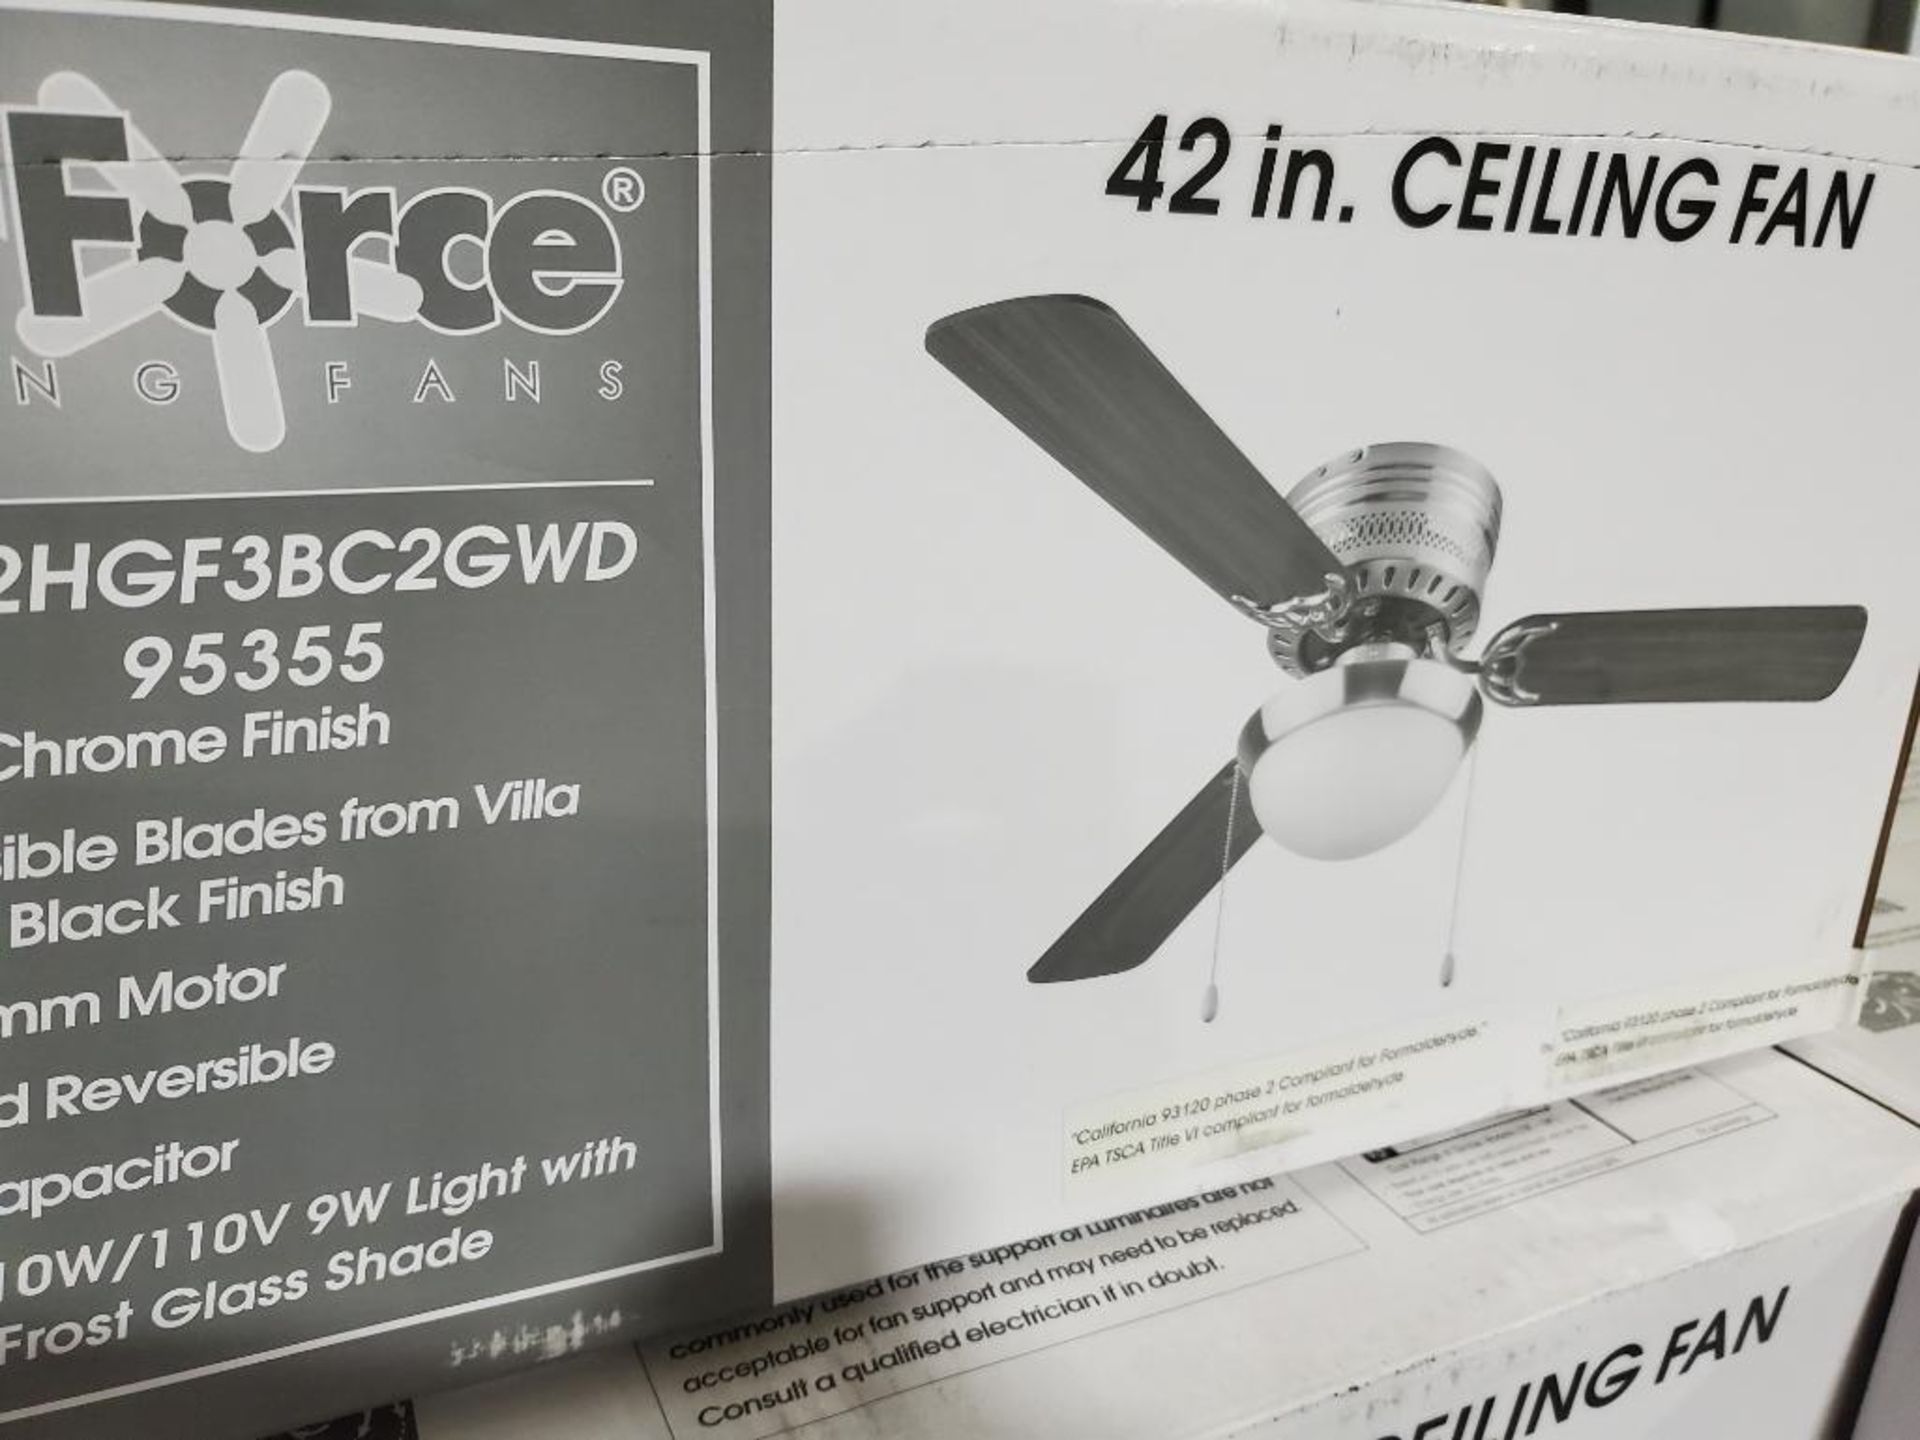 Qty 10 - AirrForce Ceiling Fans 42HGF3BC2GWD, 95355. 42 in ceiling fan. New in box. - Image 5 of 5